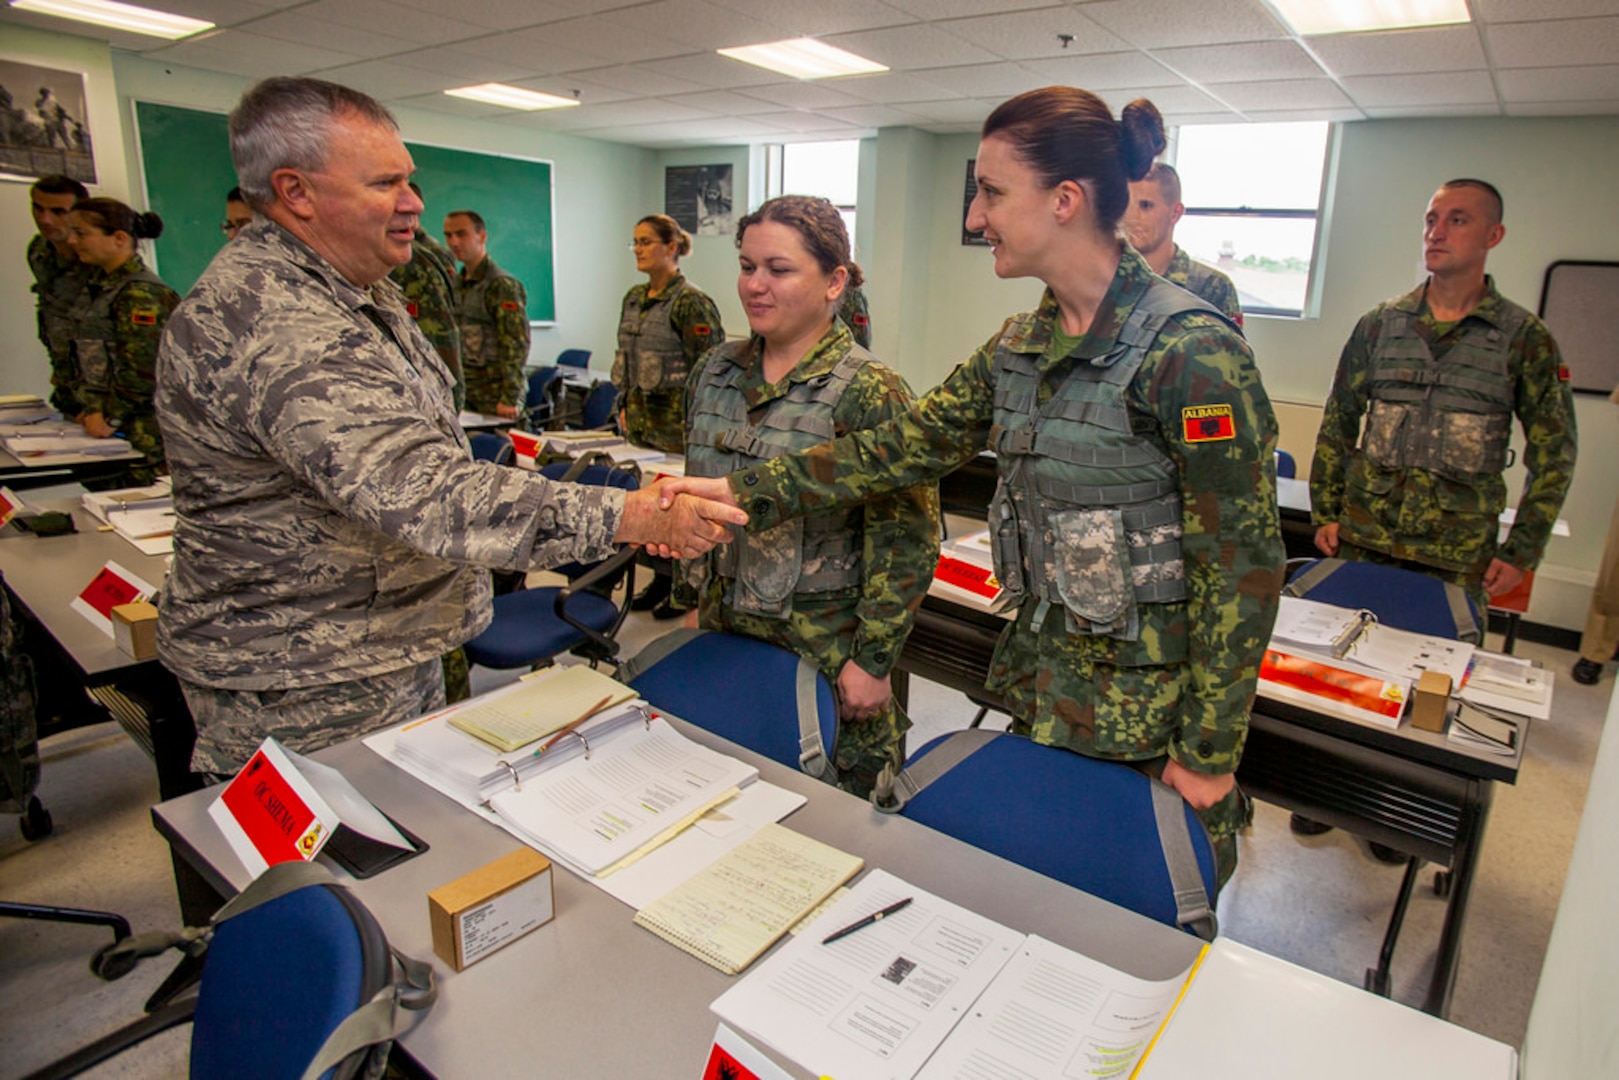 Brig. Gen. Michael L. Cunniff, New Jersey's adjutant general, greets Albanian Officer Candidate Renalda Manushi prior to ceremony where members of the Albanian Officer Candidate Class 001 transition from Phase One to Phase Two of the New Jersey Army National Guard OCS program with the awarding of the infantry blue ascot with the OCS roadwheel logo at Joint Base McGuire-Dix-Lakehurst, N.J., May 29, 2014. 